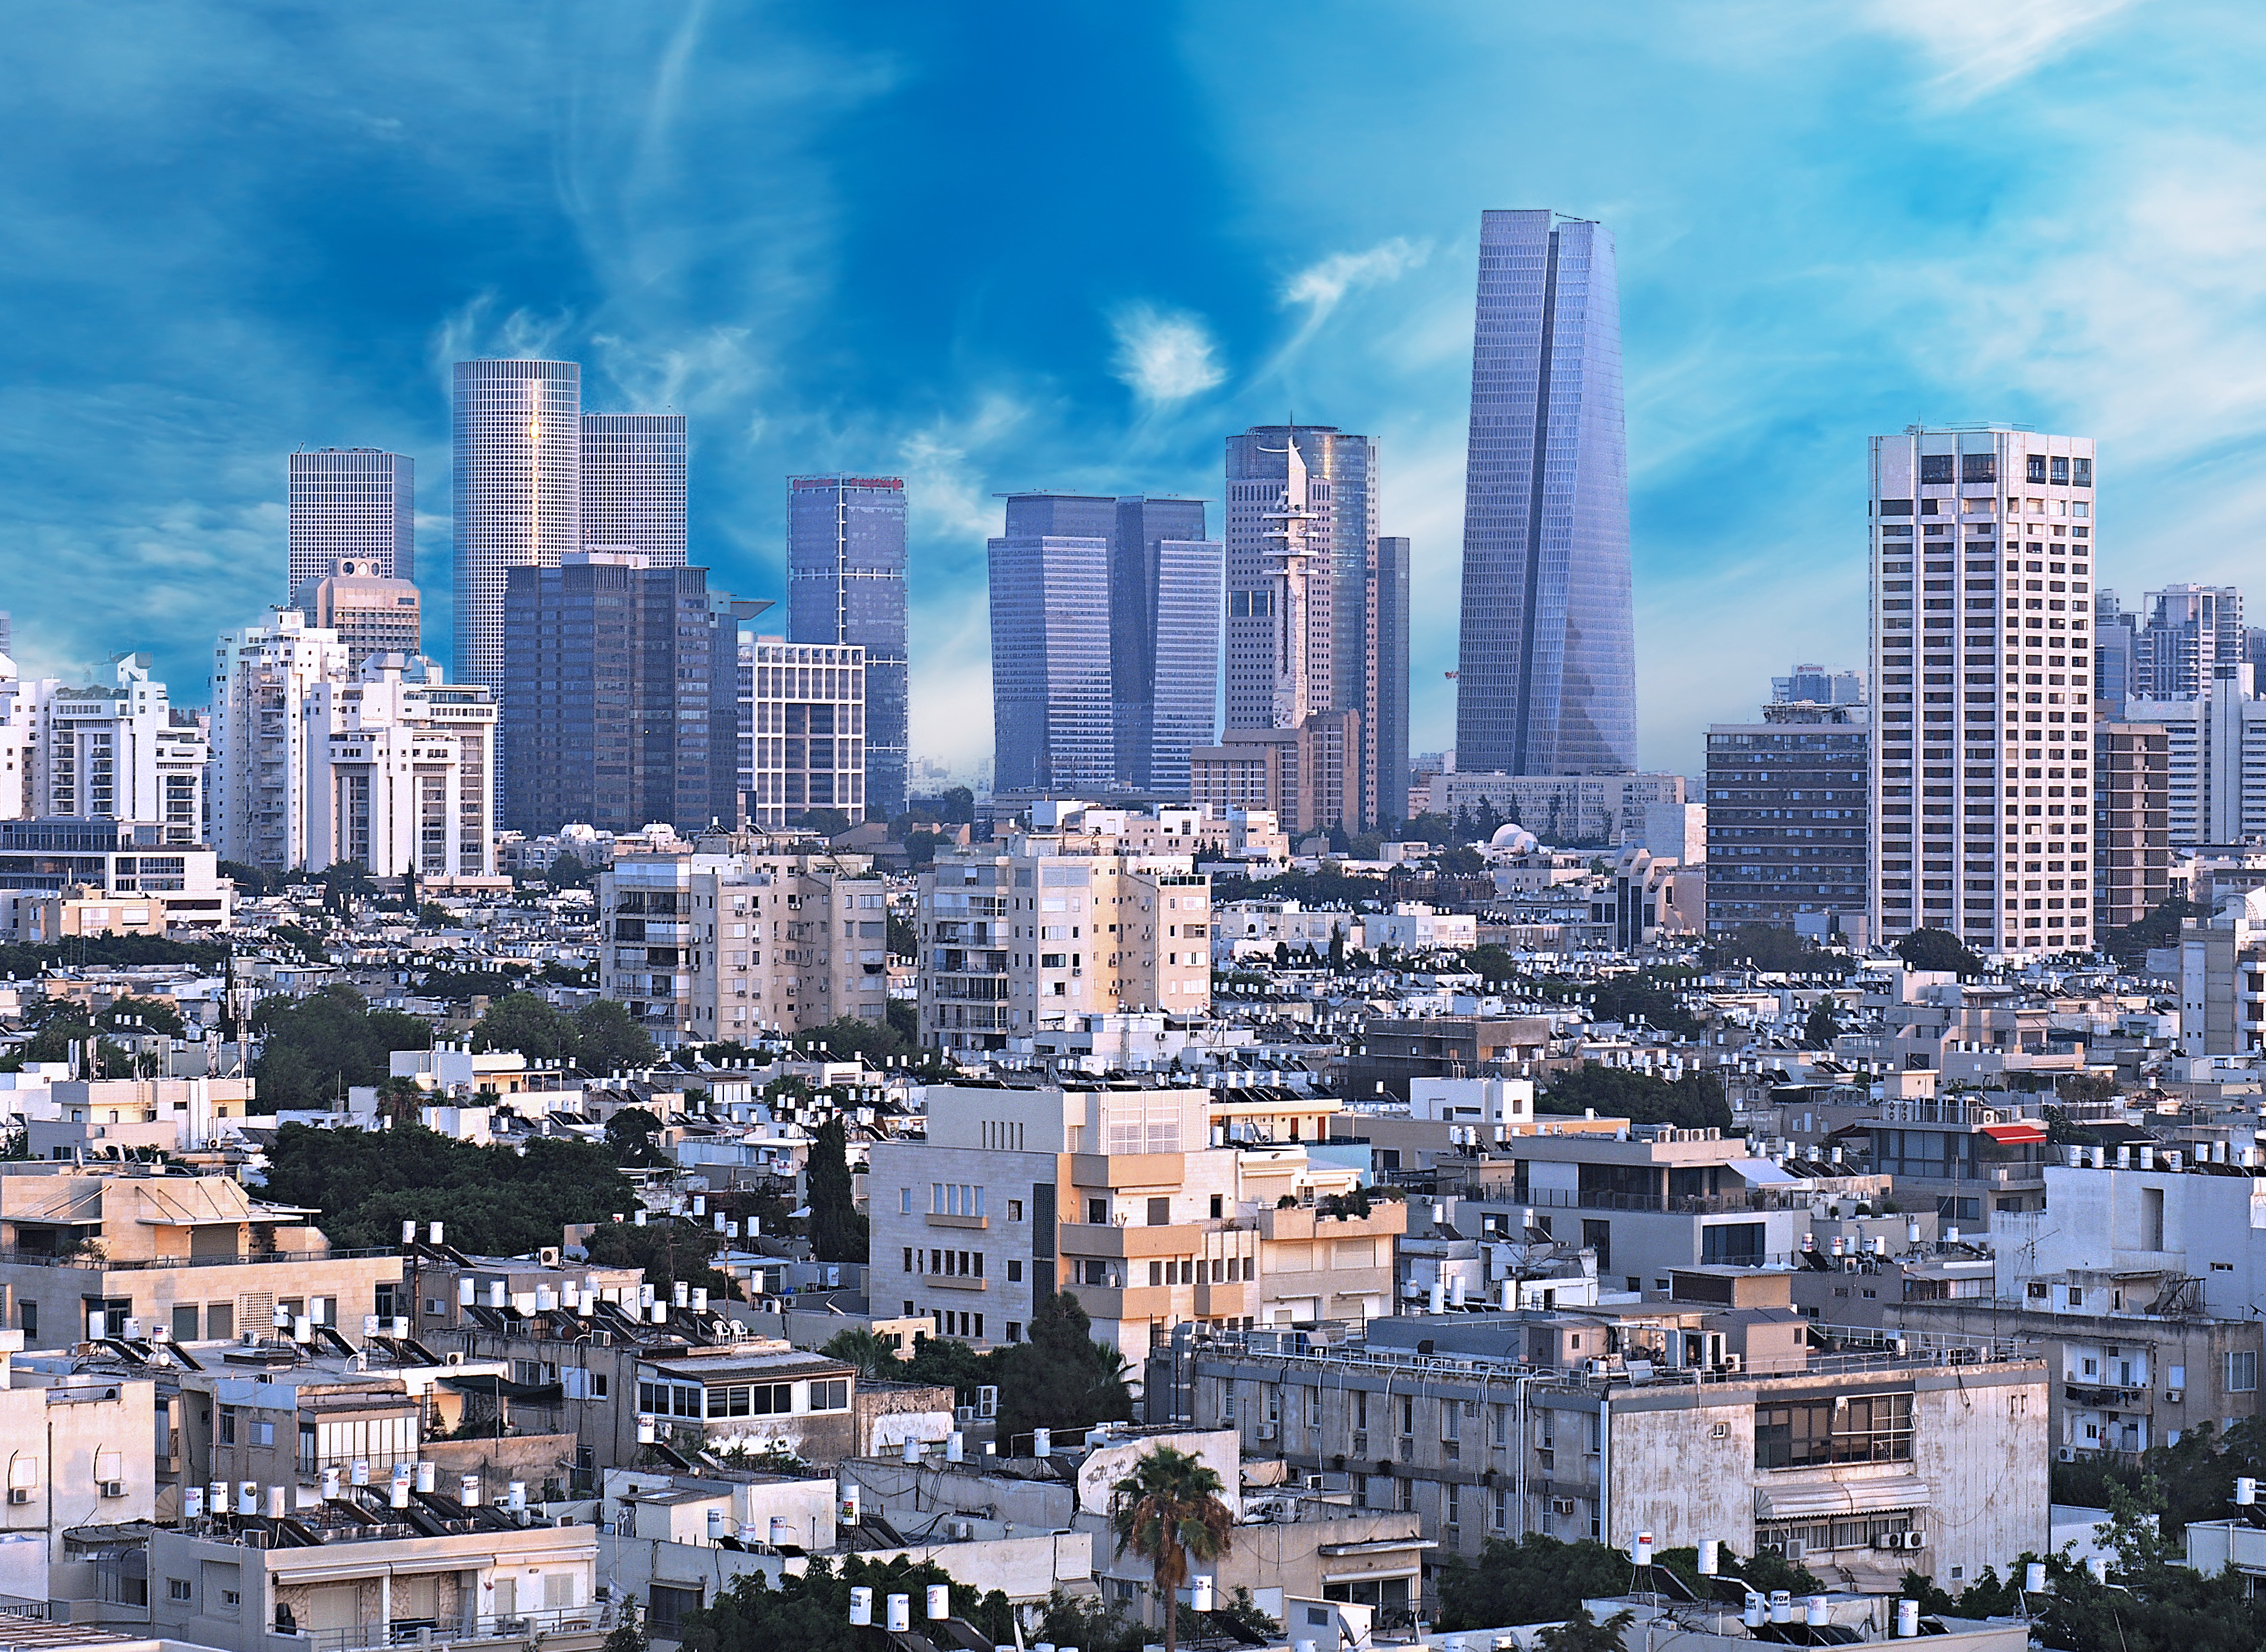 Israel’s tech exits drop to USD 5.8 billion in H1 2020, lowest in six years